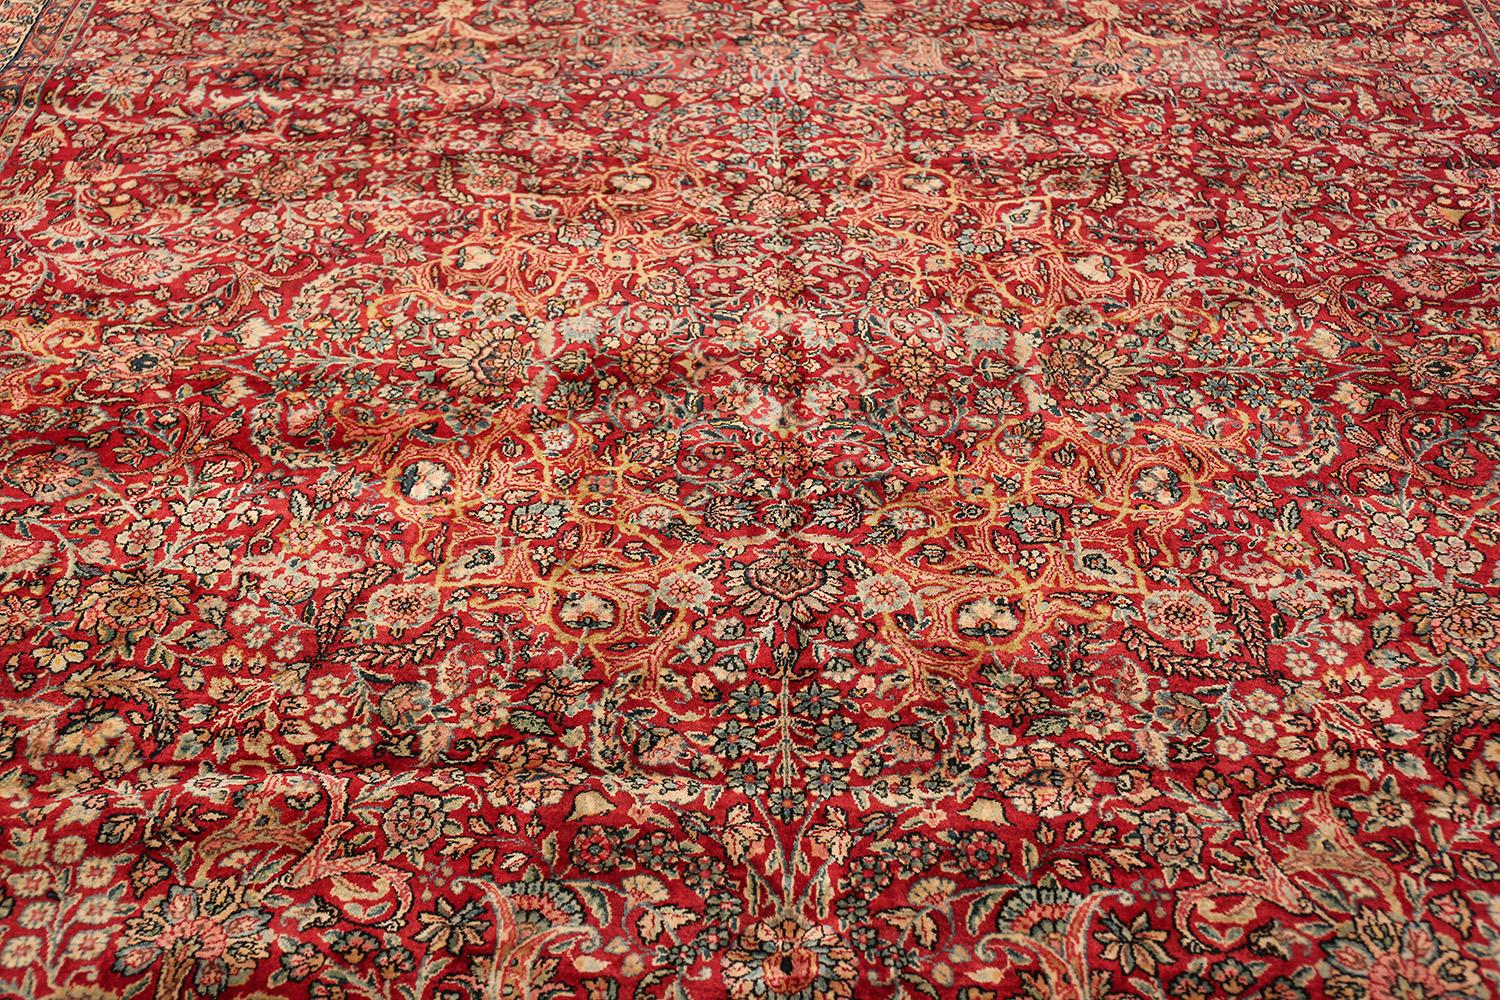 Wool Antique Kerman Persian Rug. Size: 9 ft 9 in x 17 ft 3 in (2.97 m x 5.26 m)